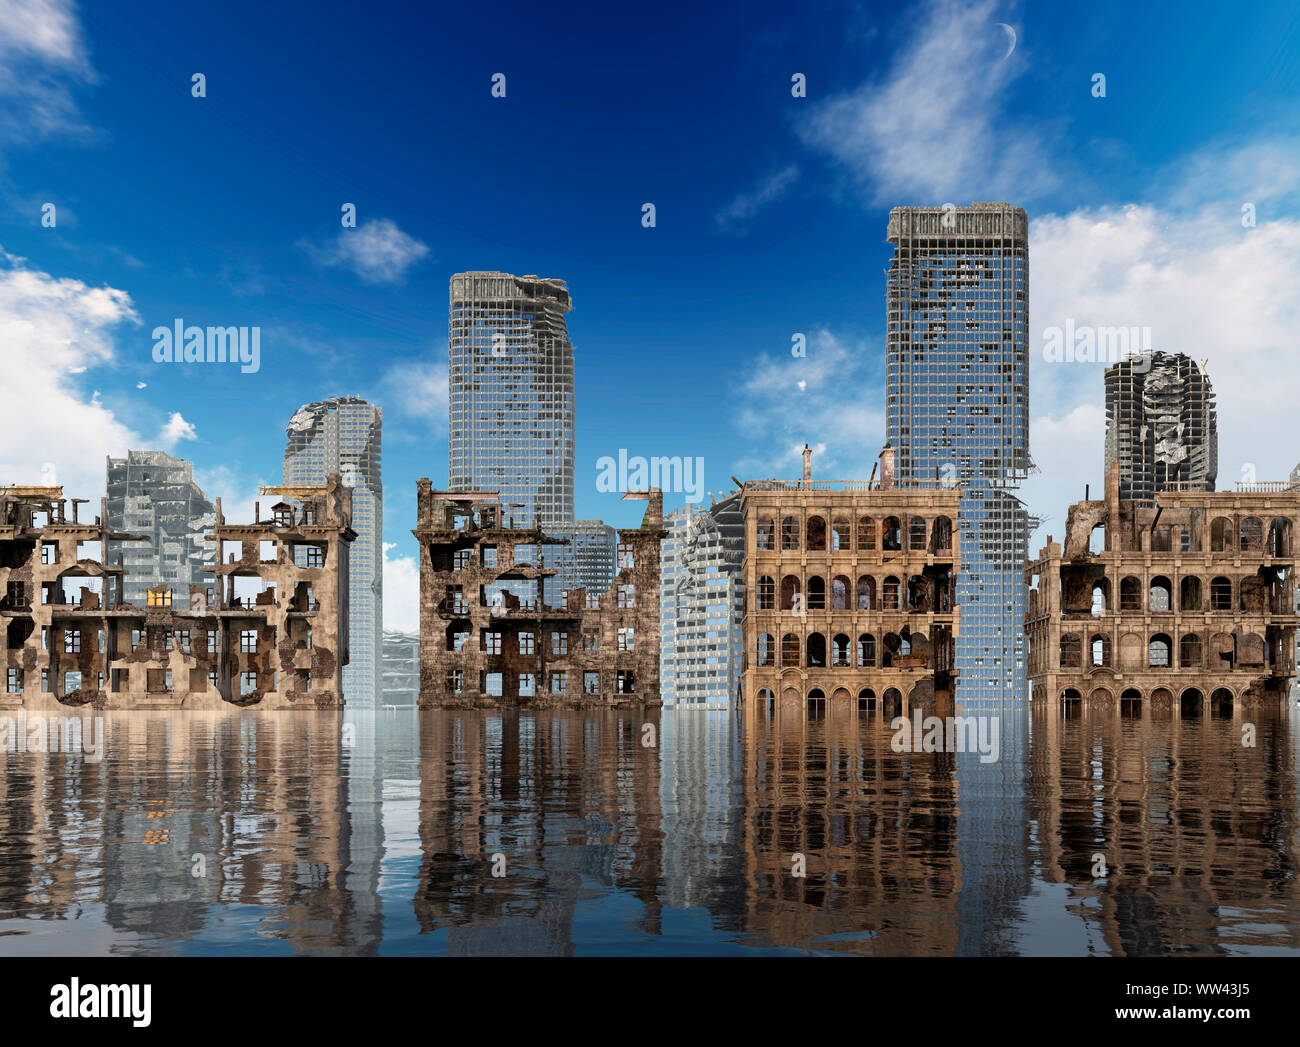 3D illustration global warming Ruins of a city apocalyptic landscape concept Stock Photo